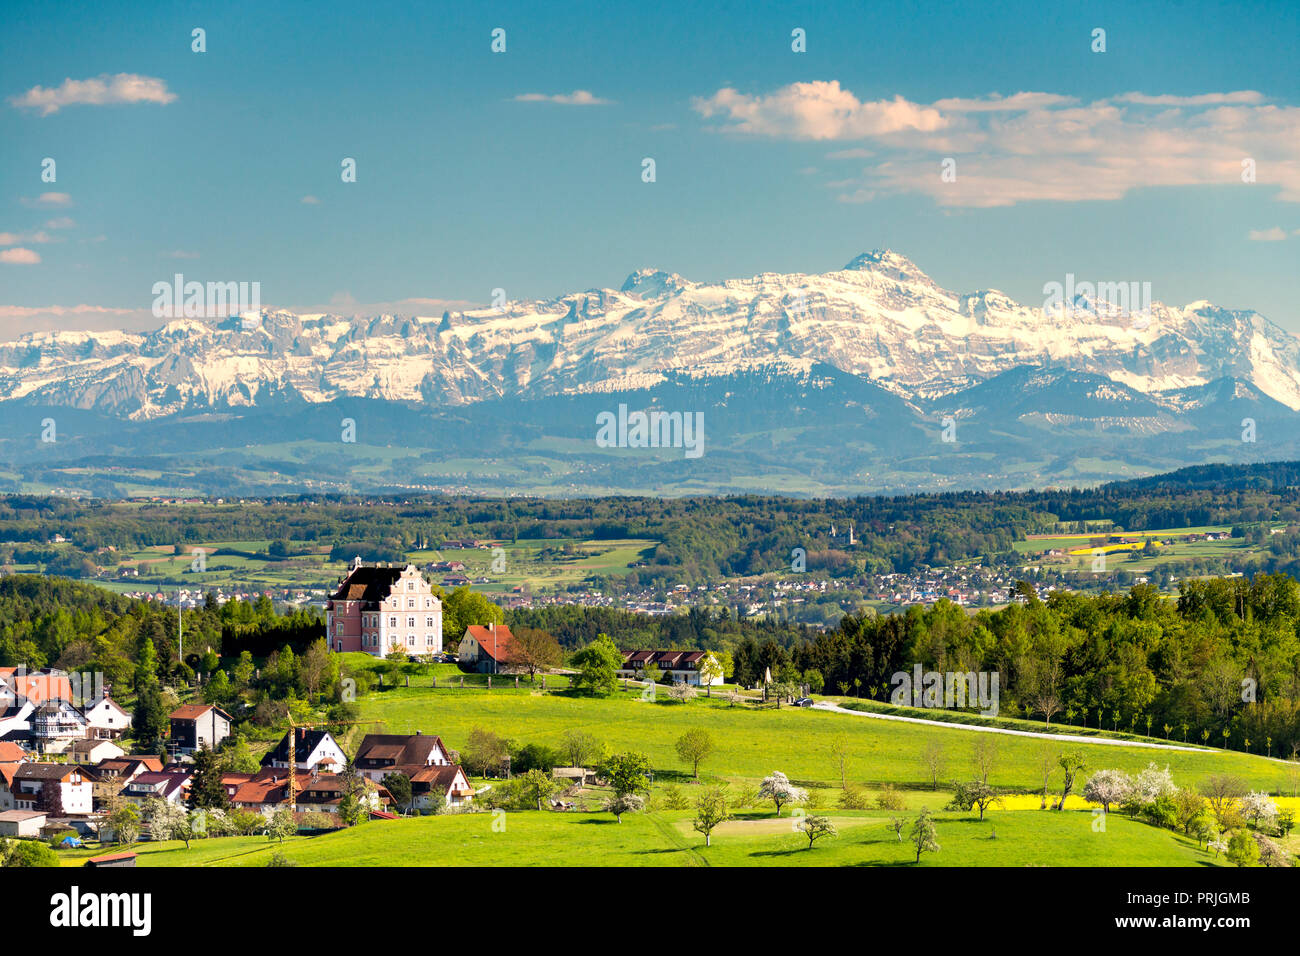 View of Freudental Castle, behind mountain range with Alpstein and Säntis, Allensbach, Lake Constance region Stock Photo